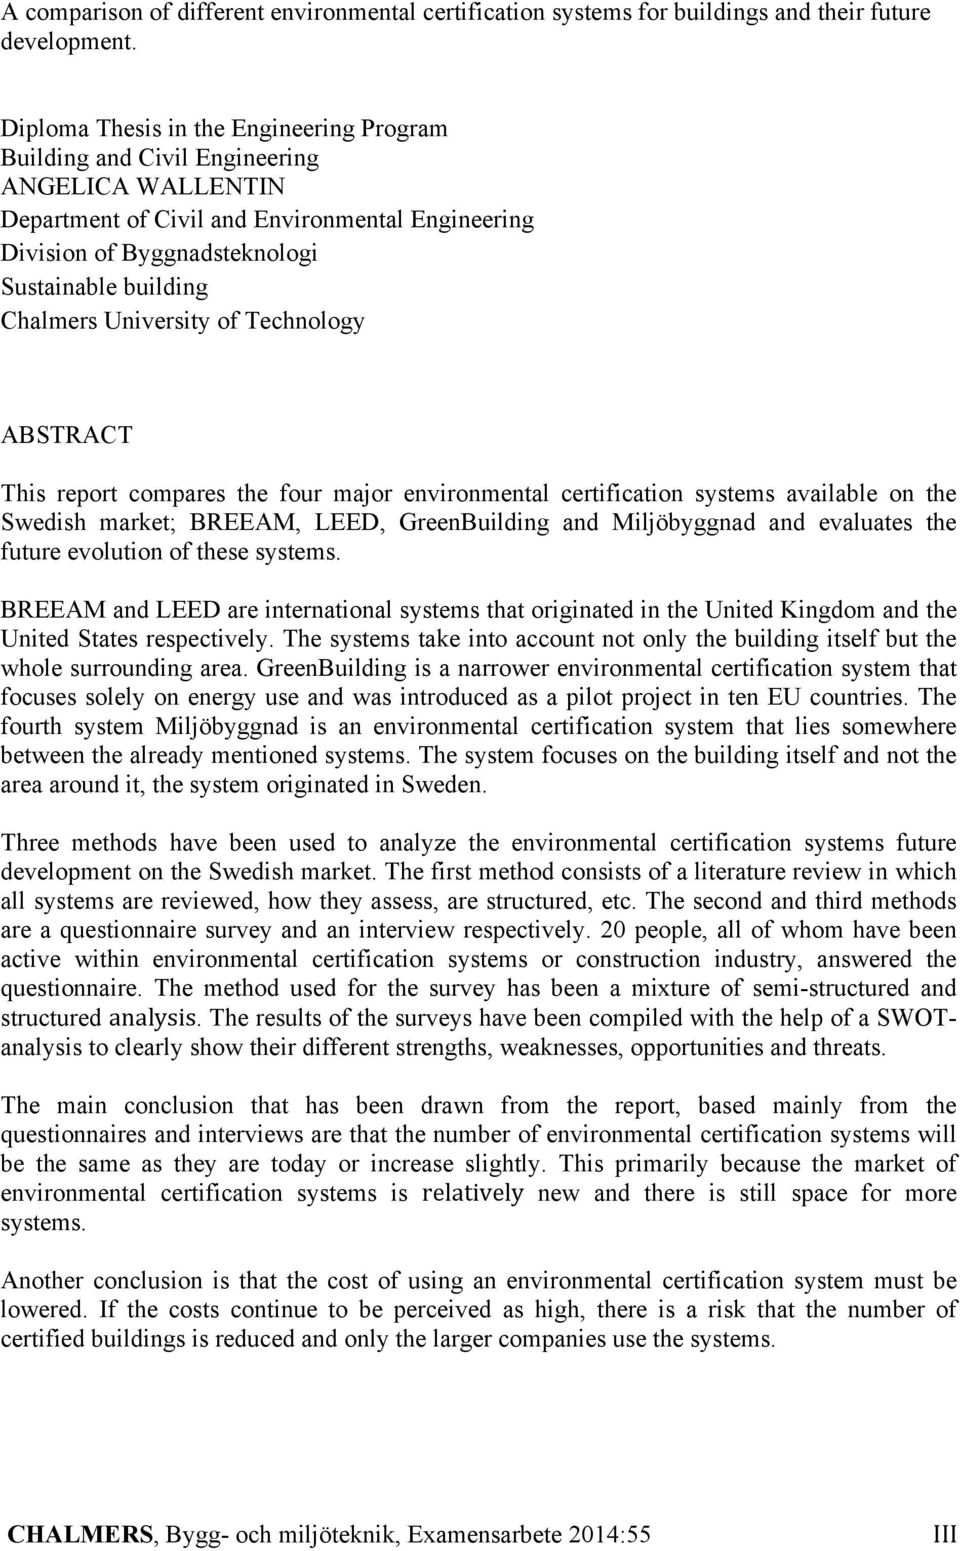 Chalmers University of Technology ABSTRACT This report compares the four major environmental certification systems available on the Swedish market; BREEAM, LEED, GreenBuilding and Miljöbyggnad and